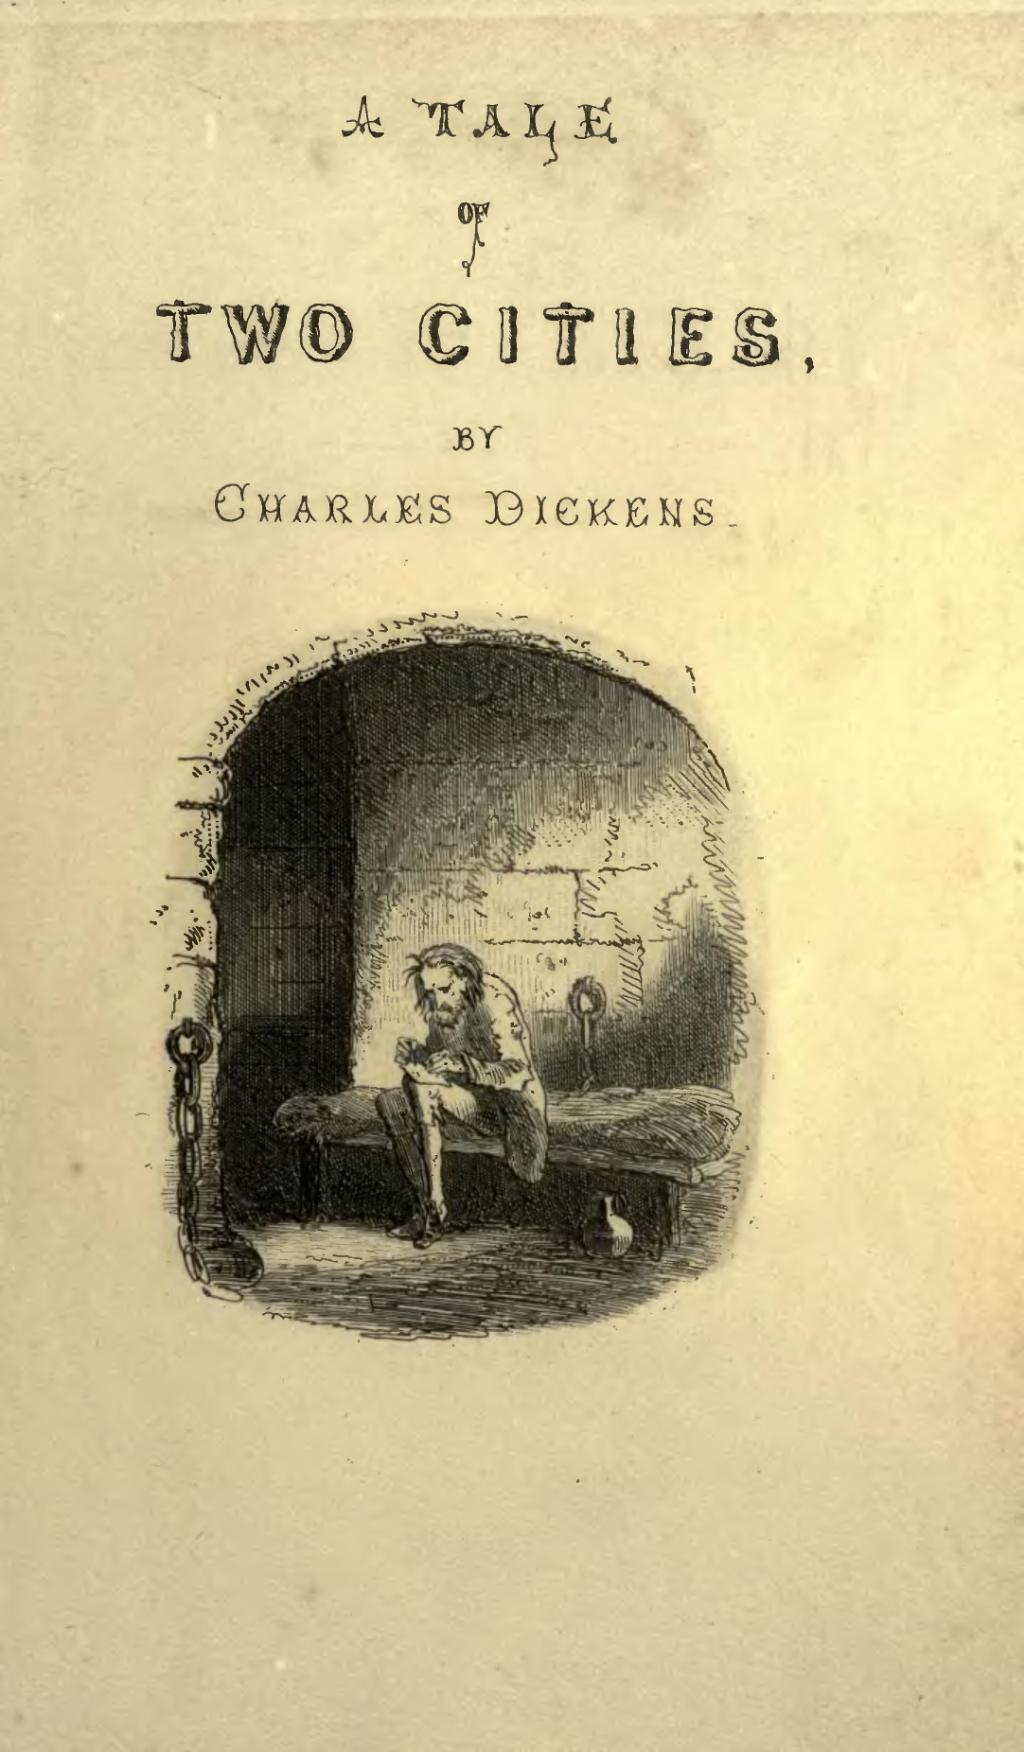 a tale of two cities pdf by charles dickens